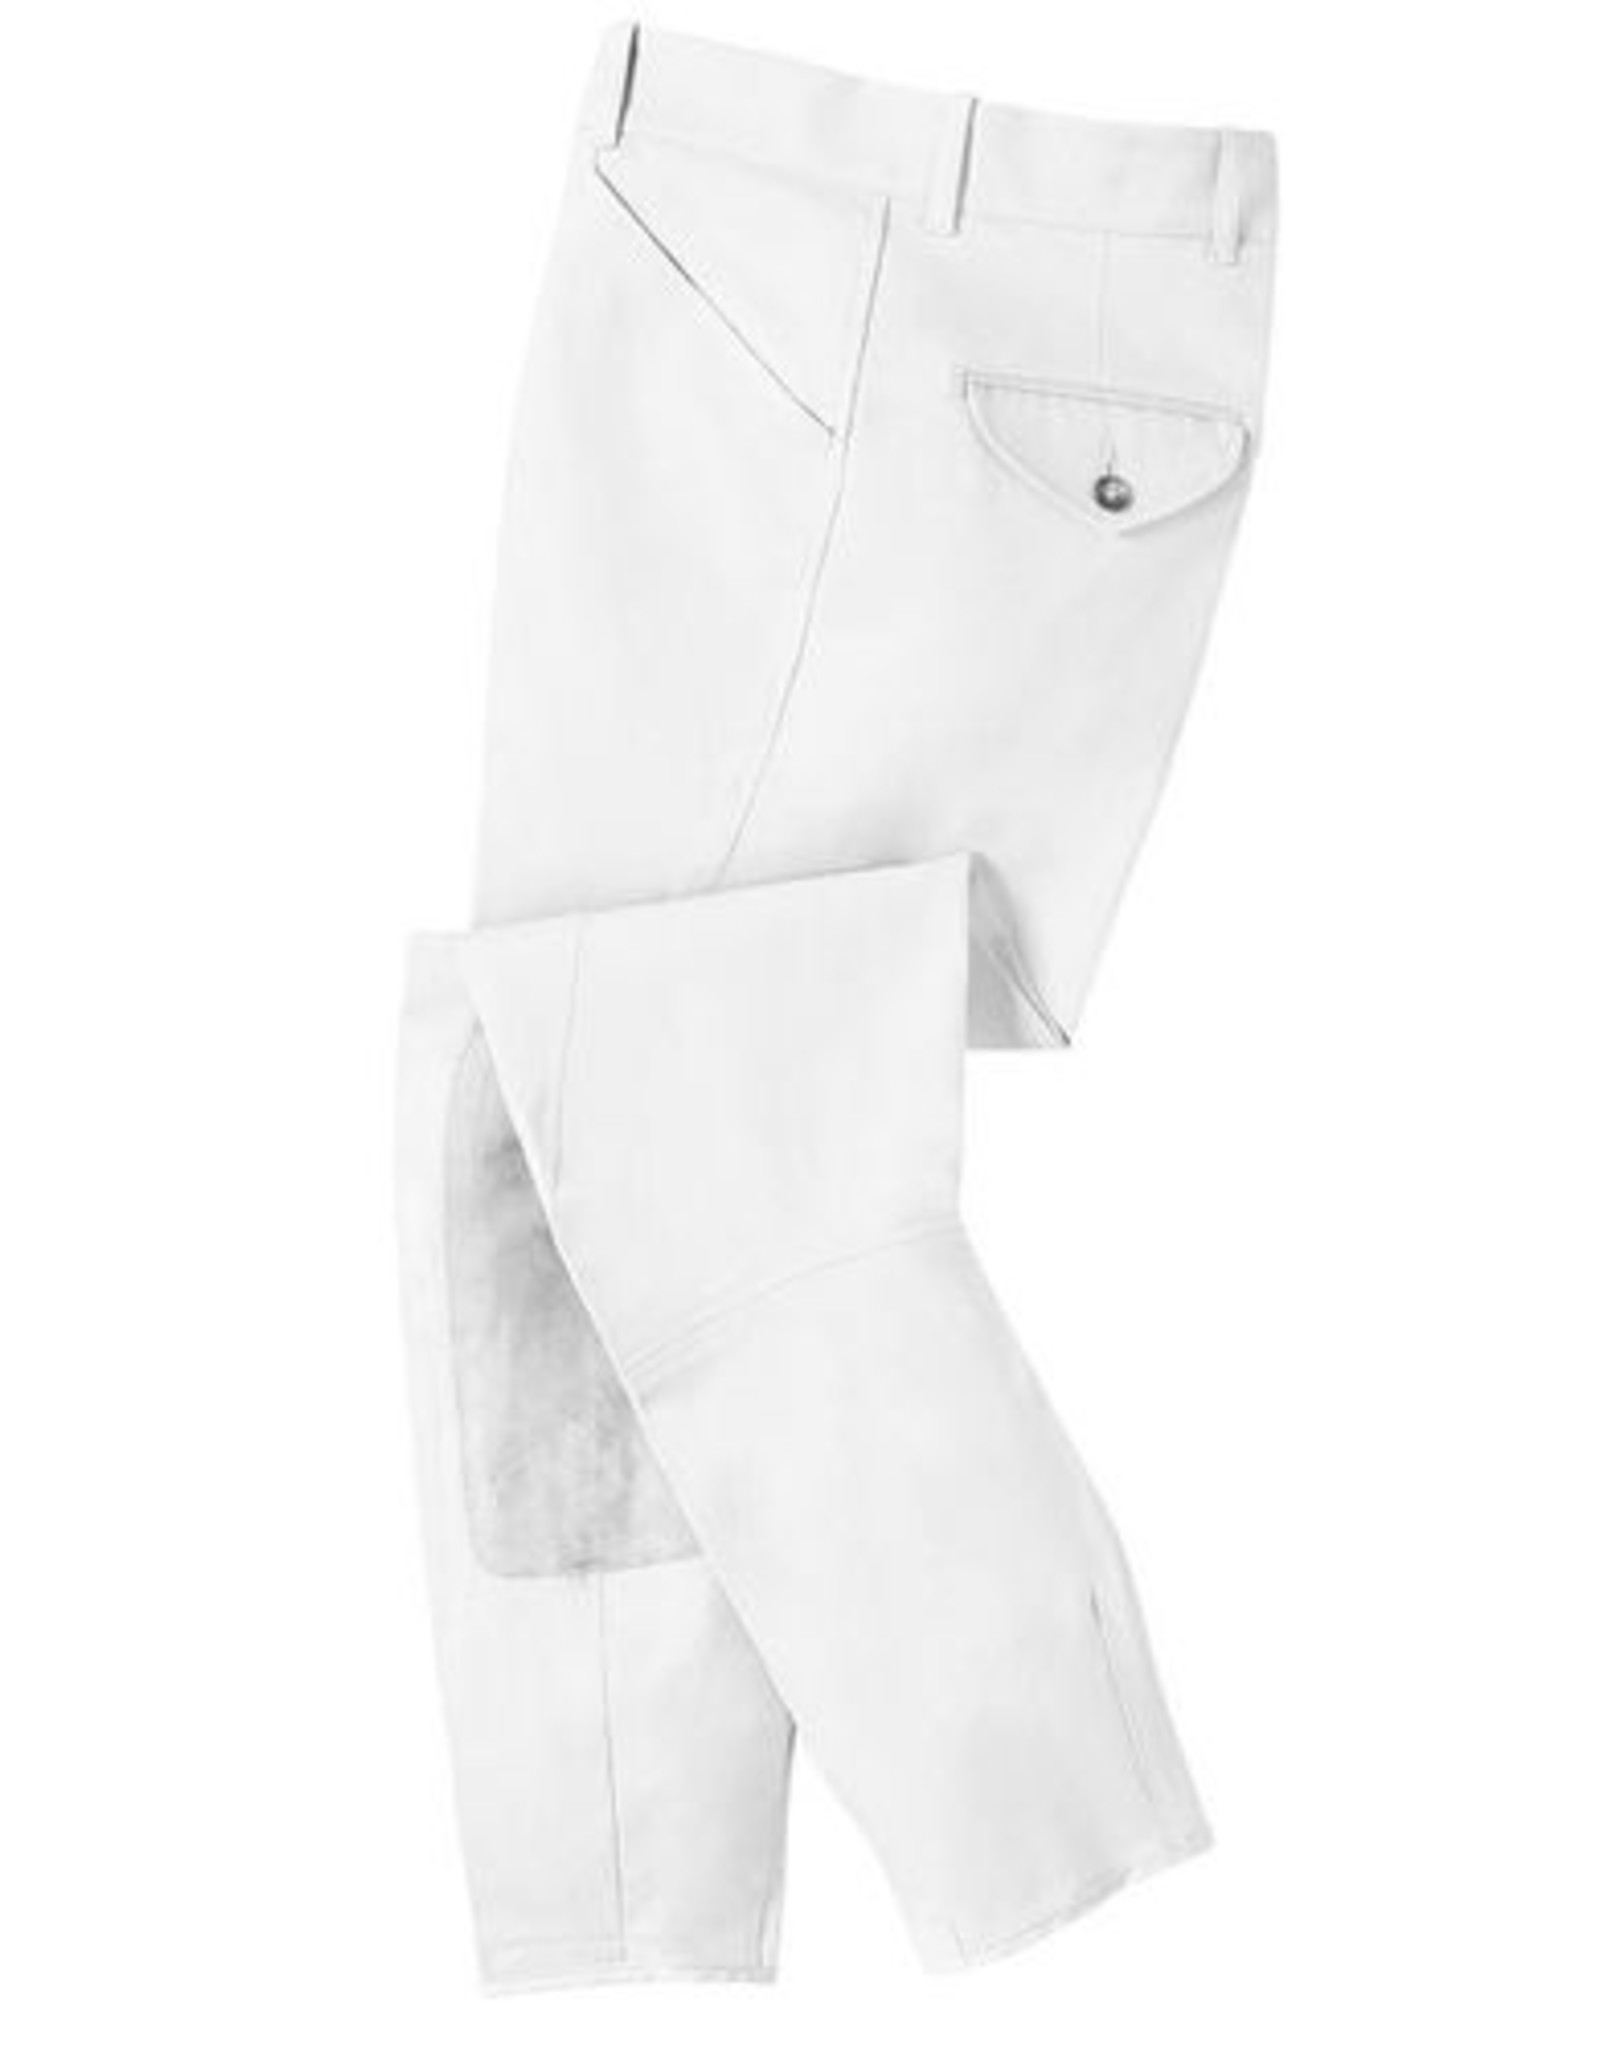 Tailored Sportsman Men's Knee Patch Breeches